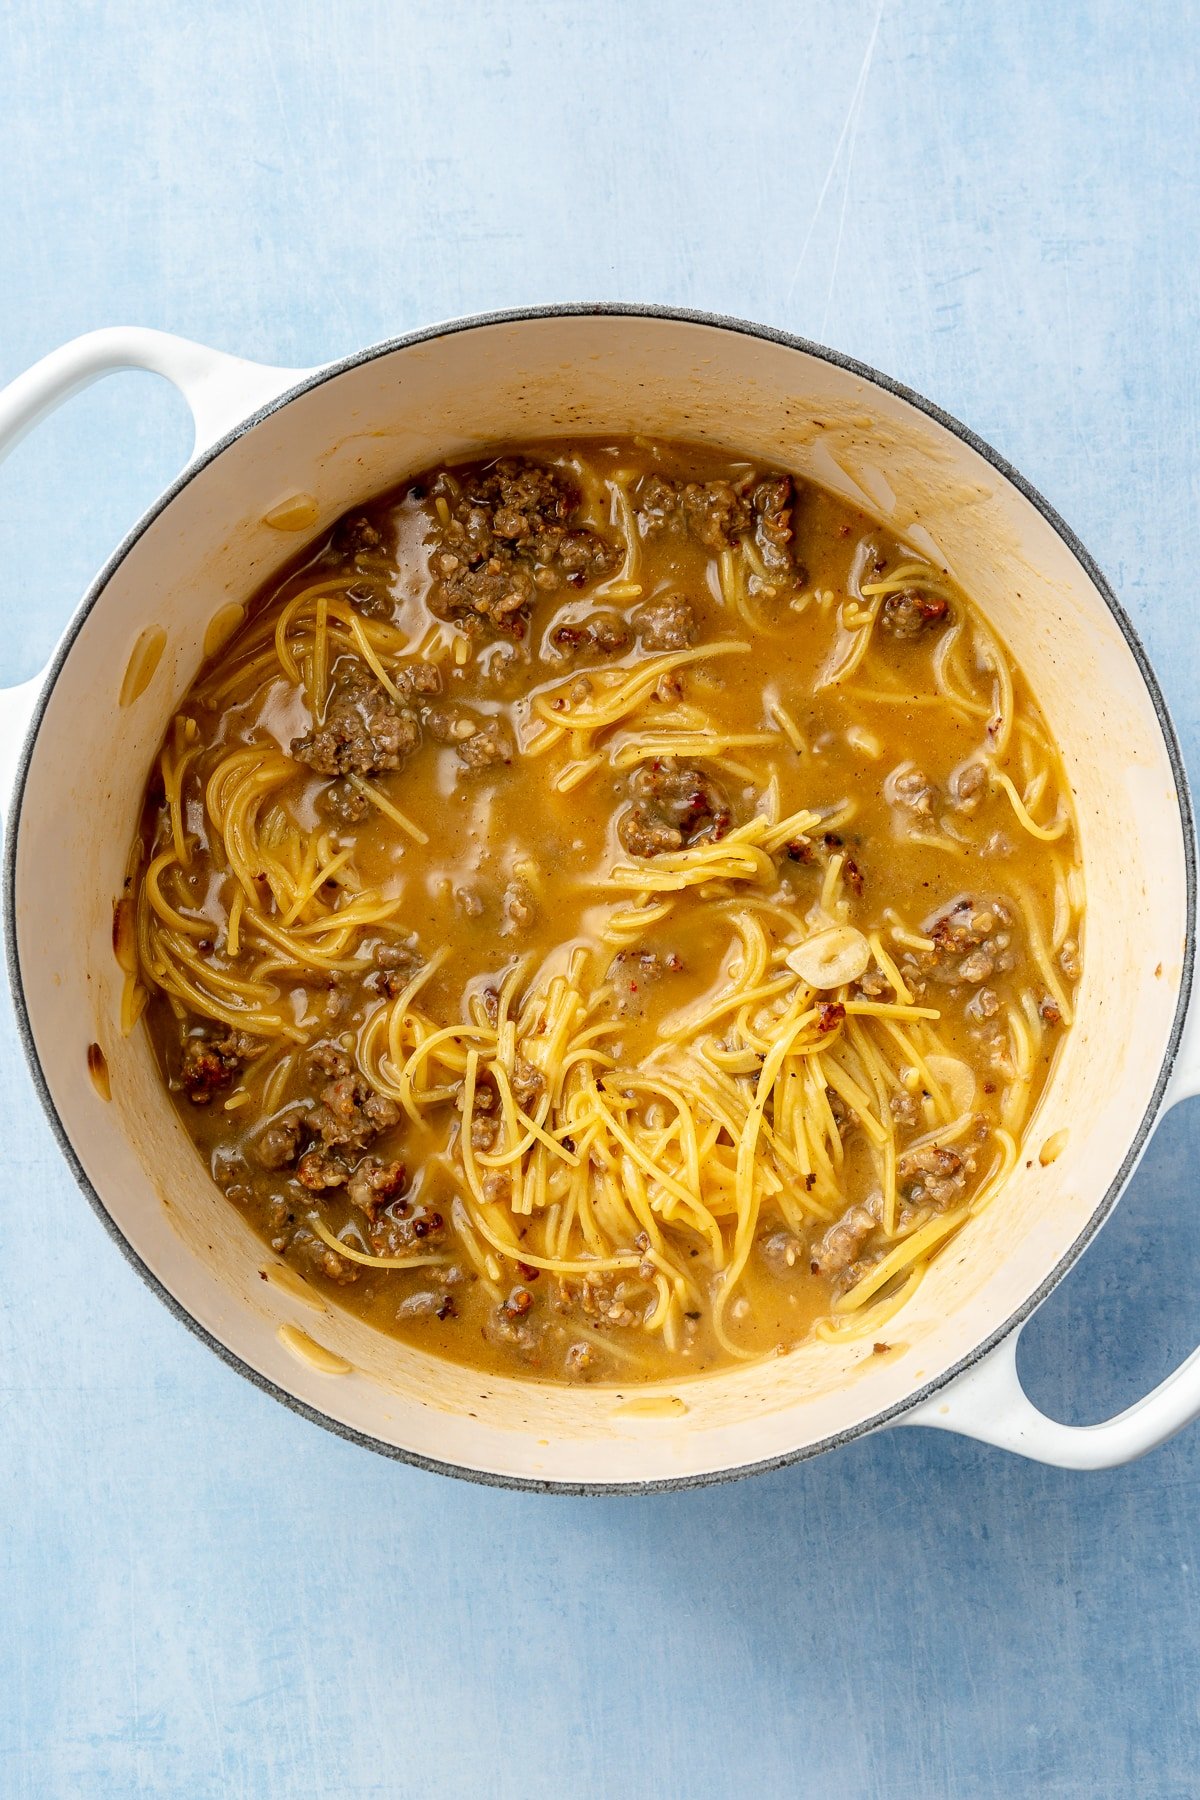 Thee spaghetti, sauce, and sausage have been fully cooked and stirred in a white, enameled pot.